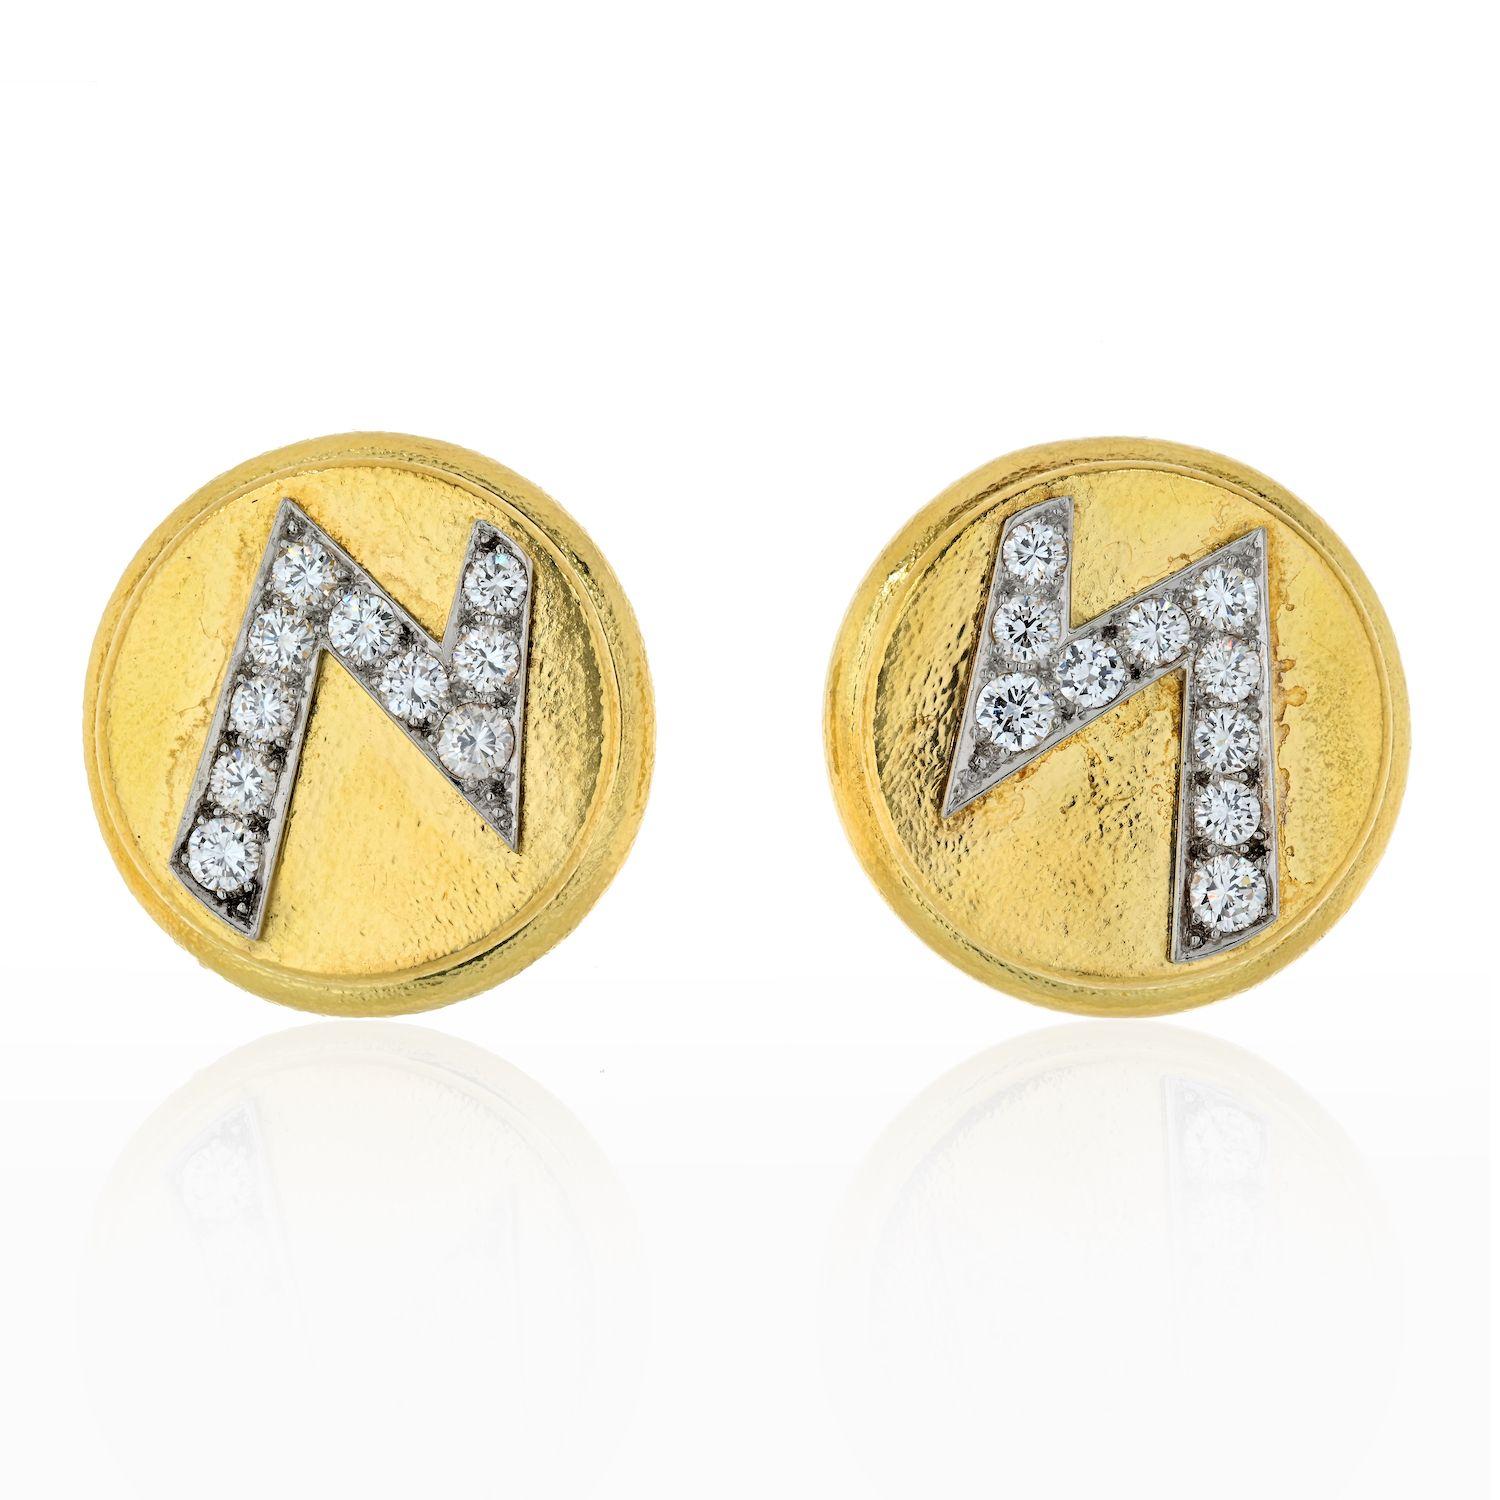 Diamond Solid 18K Yellow and White Gold Lightning Bolt Ear Clips by David Webb. 

These lovely earrings from David Webb are crafted of solid 18k yellow gold with white gold lightning bolt icons emblazoned across the piece. The lightning bolts are